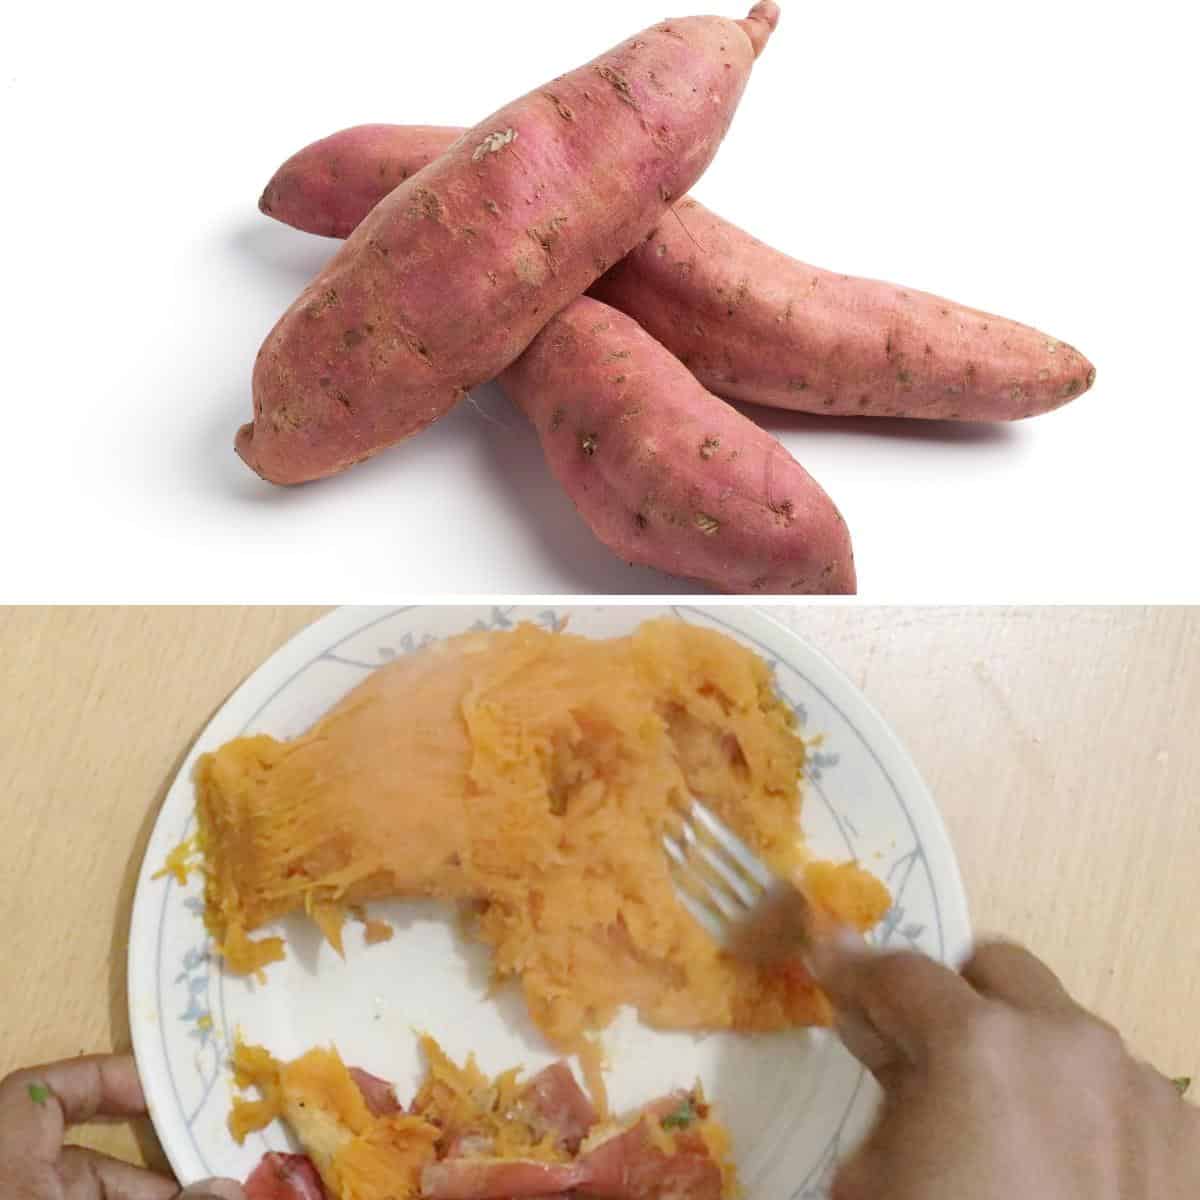 Progress pictures for cooking sweet potato.